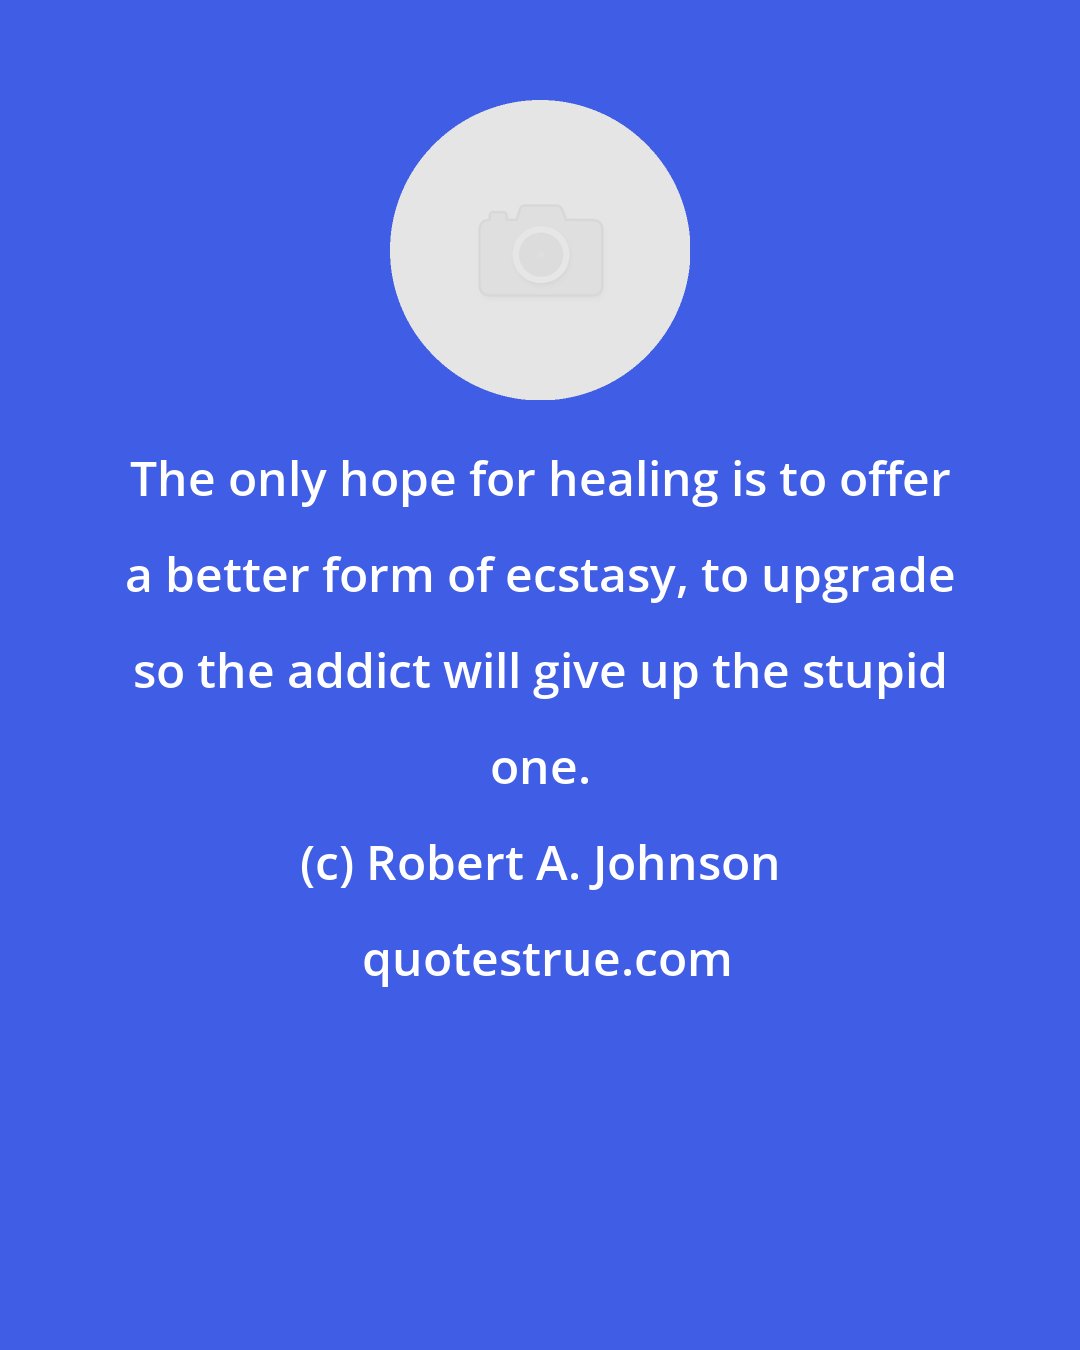 Robert A. Johnson: The only hope for healing is to offer a better form of ecstasy, to upgrade so the addict will give up the stupid one.